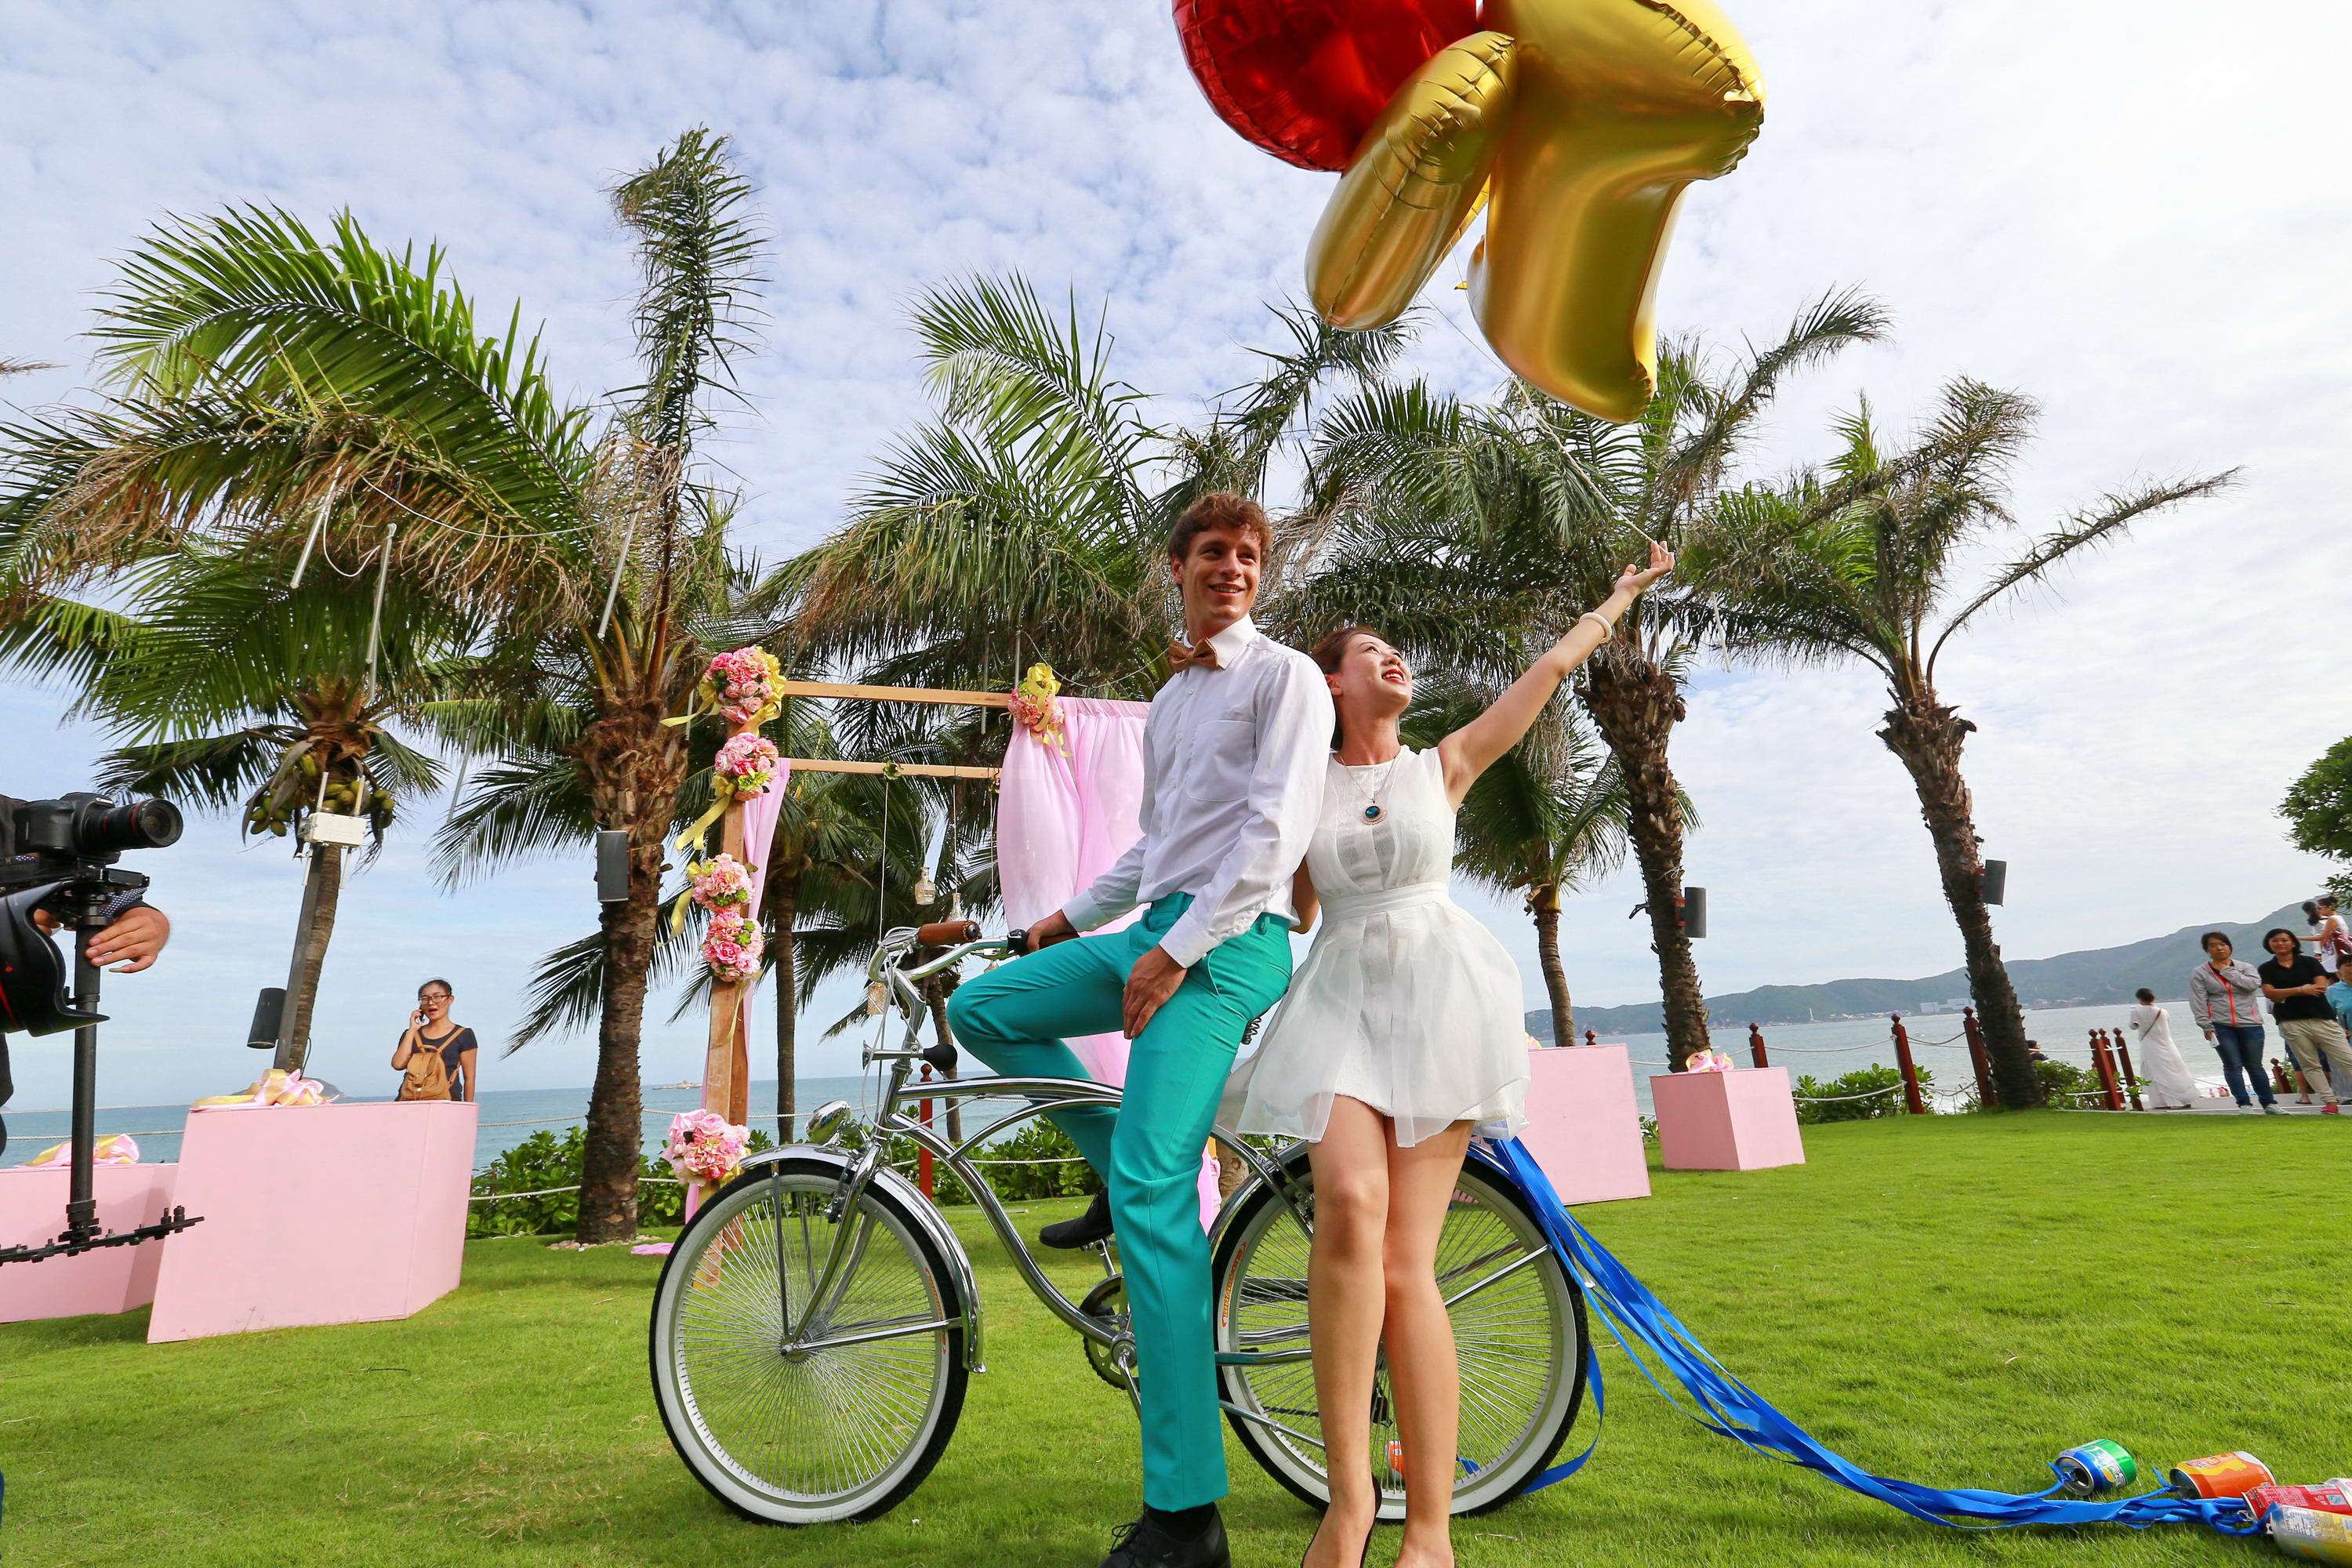 The wedding sector in Sanya is booming,